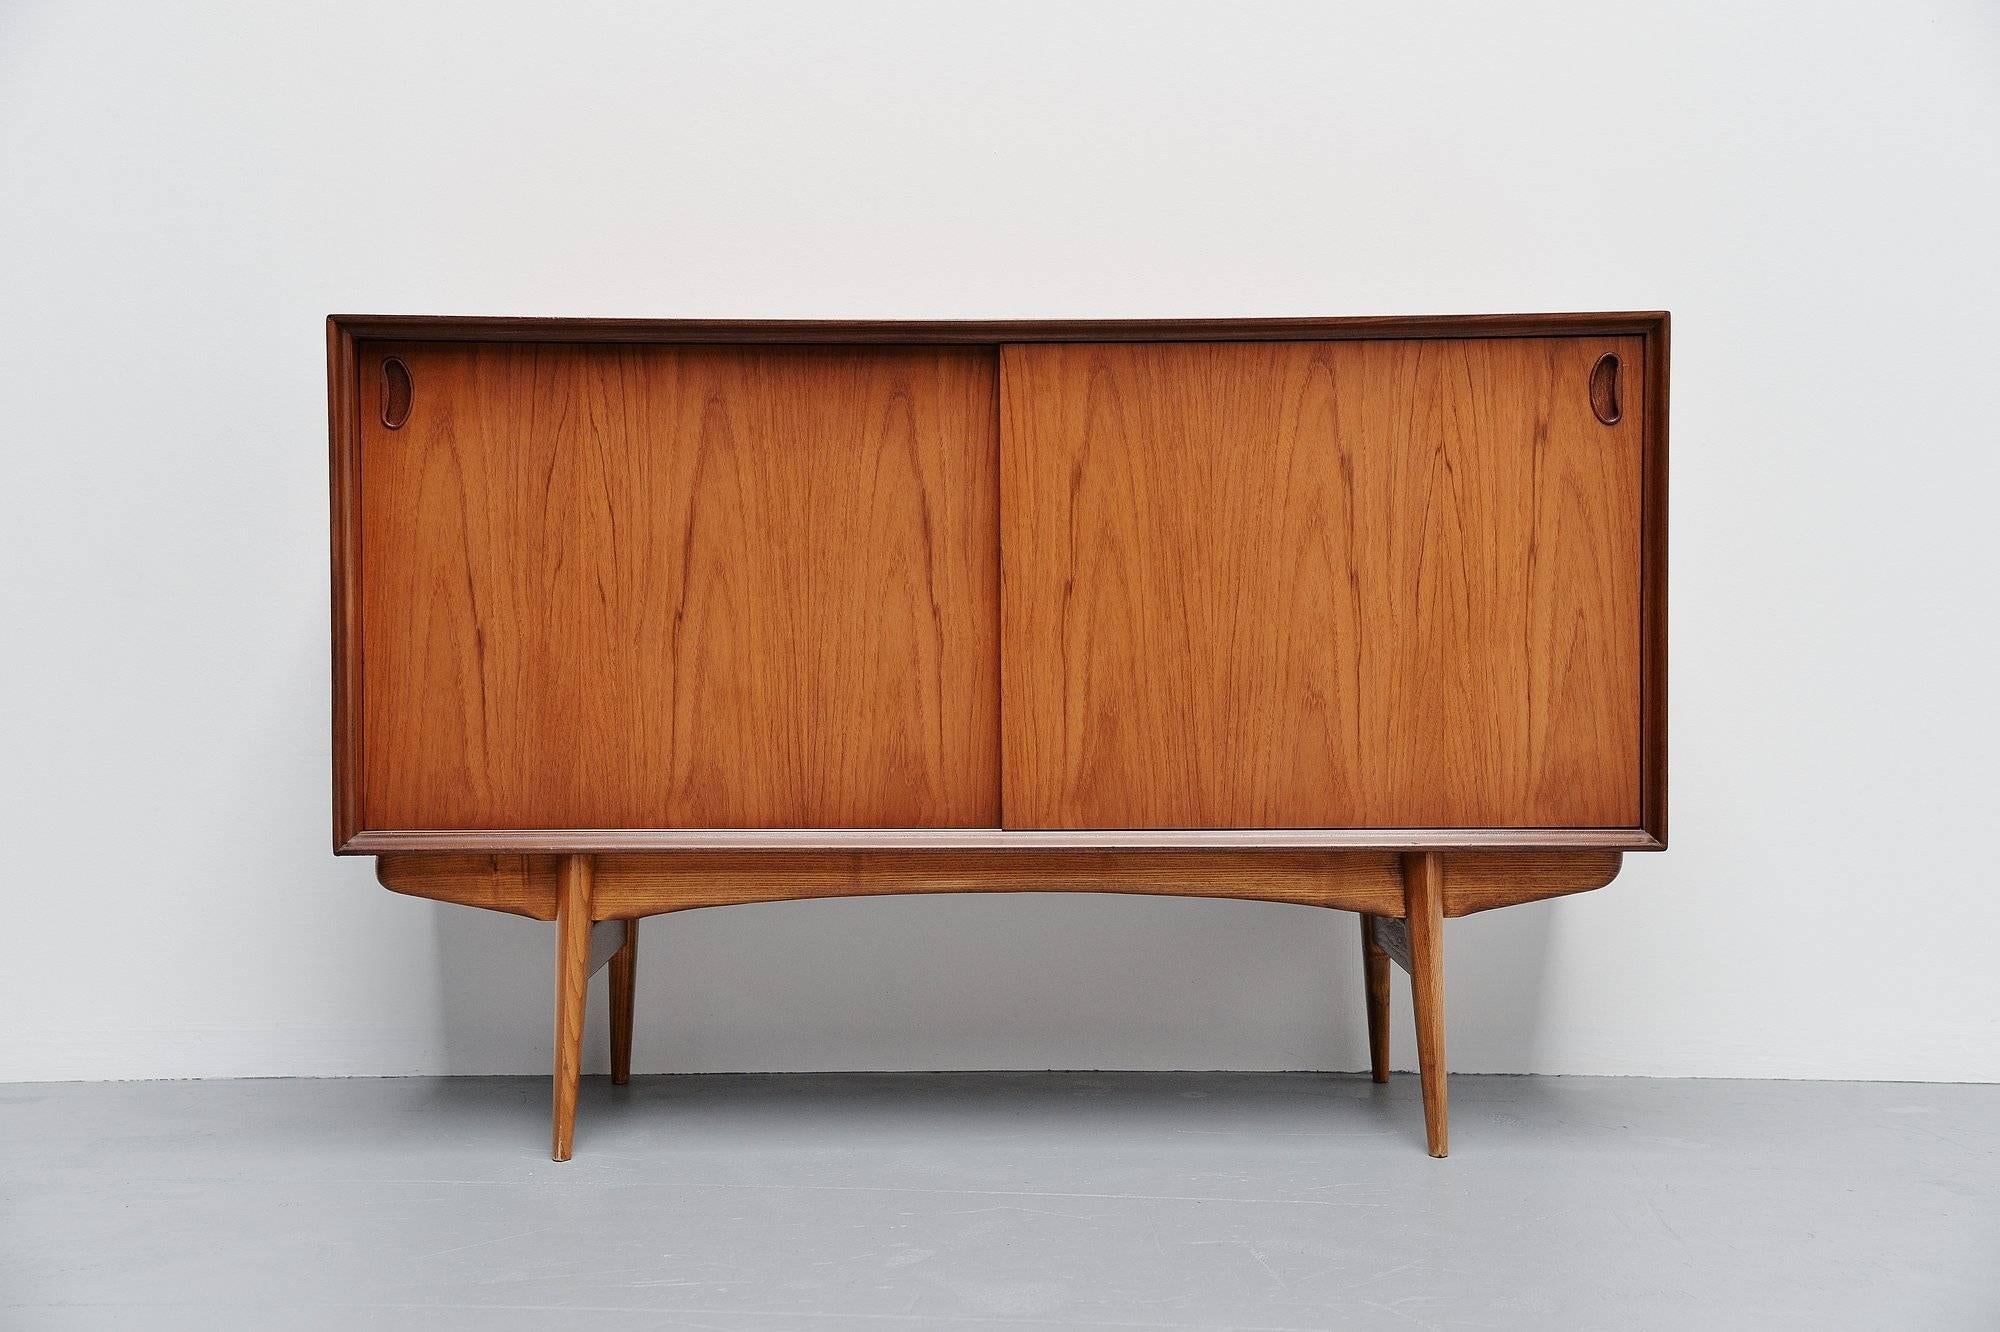 Rare small credenza designed by Oswald Vermaercke, manufactured by V-Form Belgium 1959. This credenza is from the Paola series designed by Vermaercke in 1959. This is for an unusual small two doors credenza. The credenza is made in teak wood and has